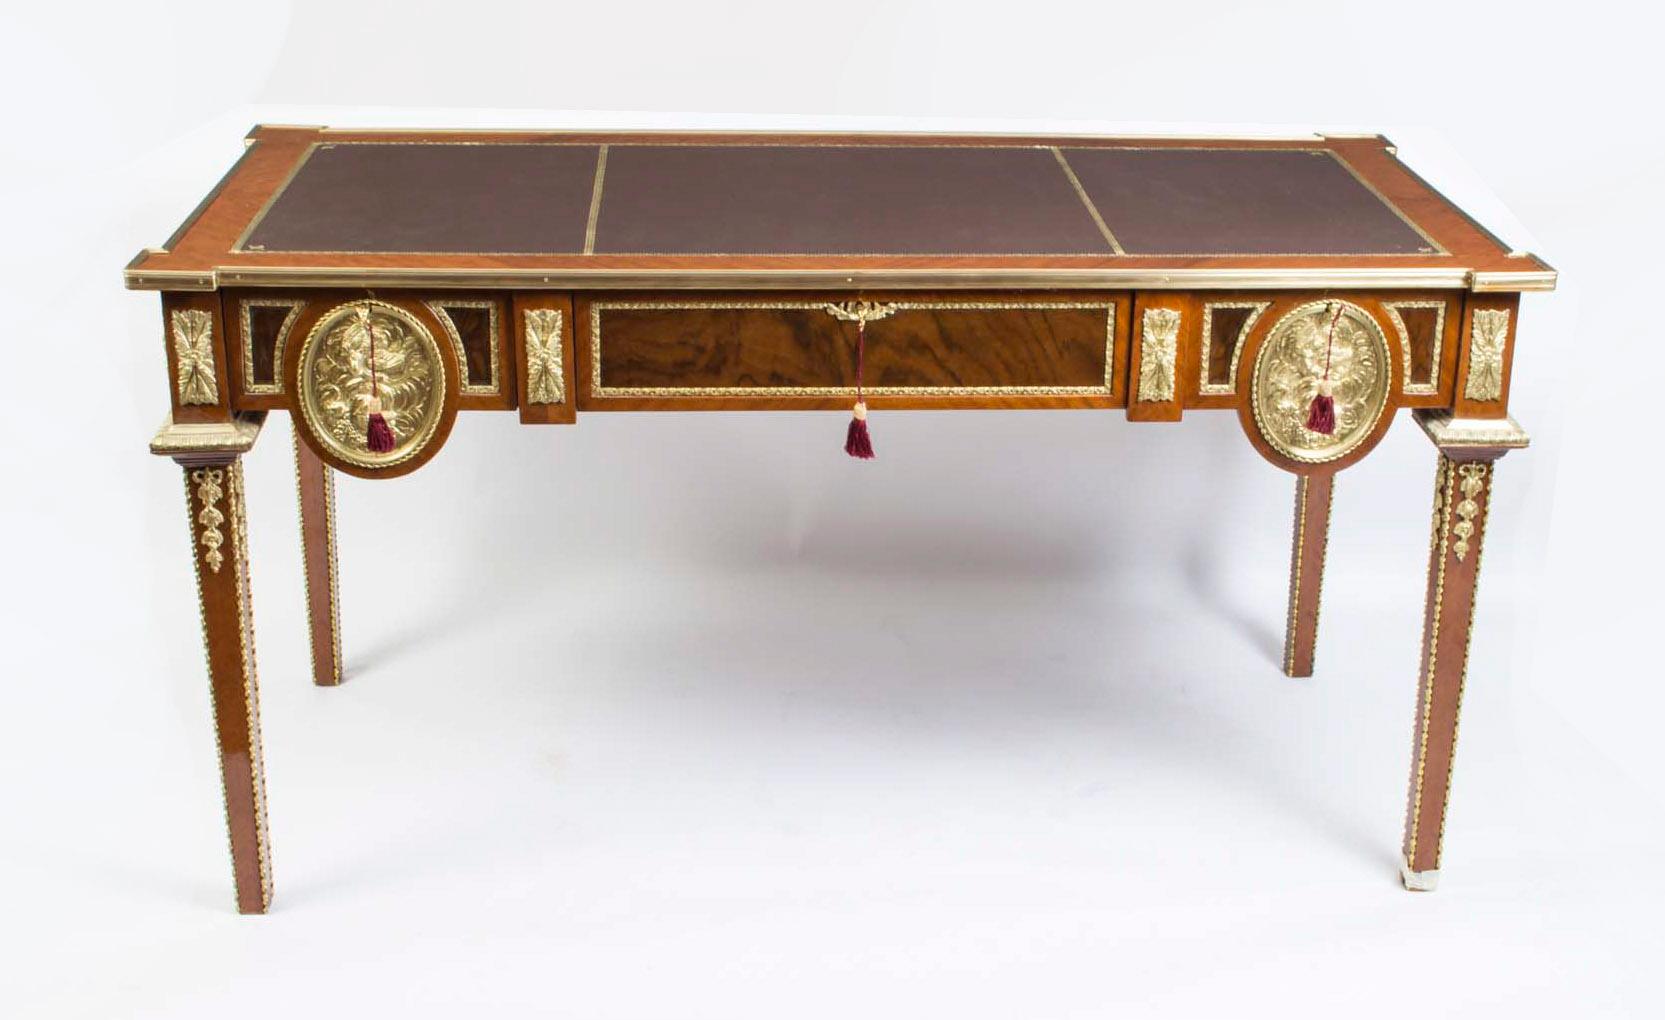 Empire Revival Vintage Empire Style Walnut Ormolu Mounted Writing Table 20th C